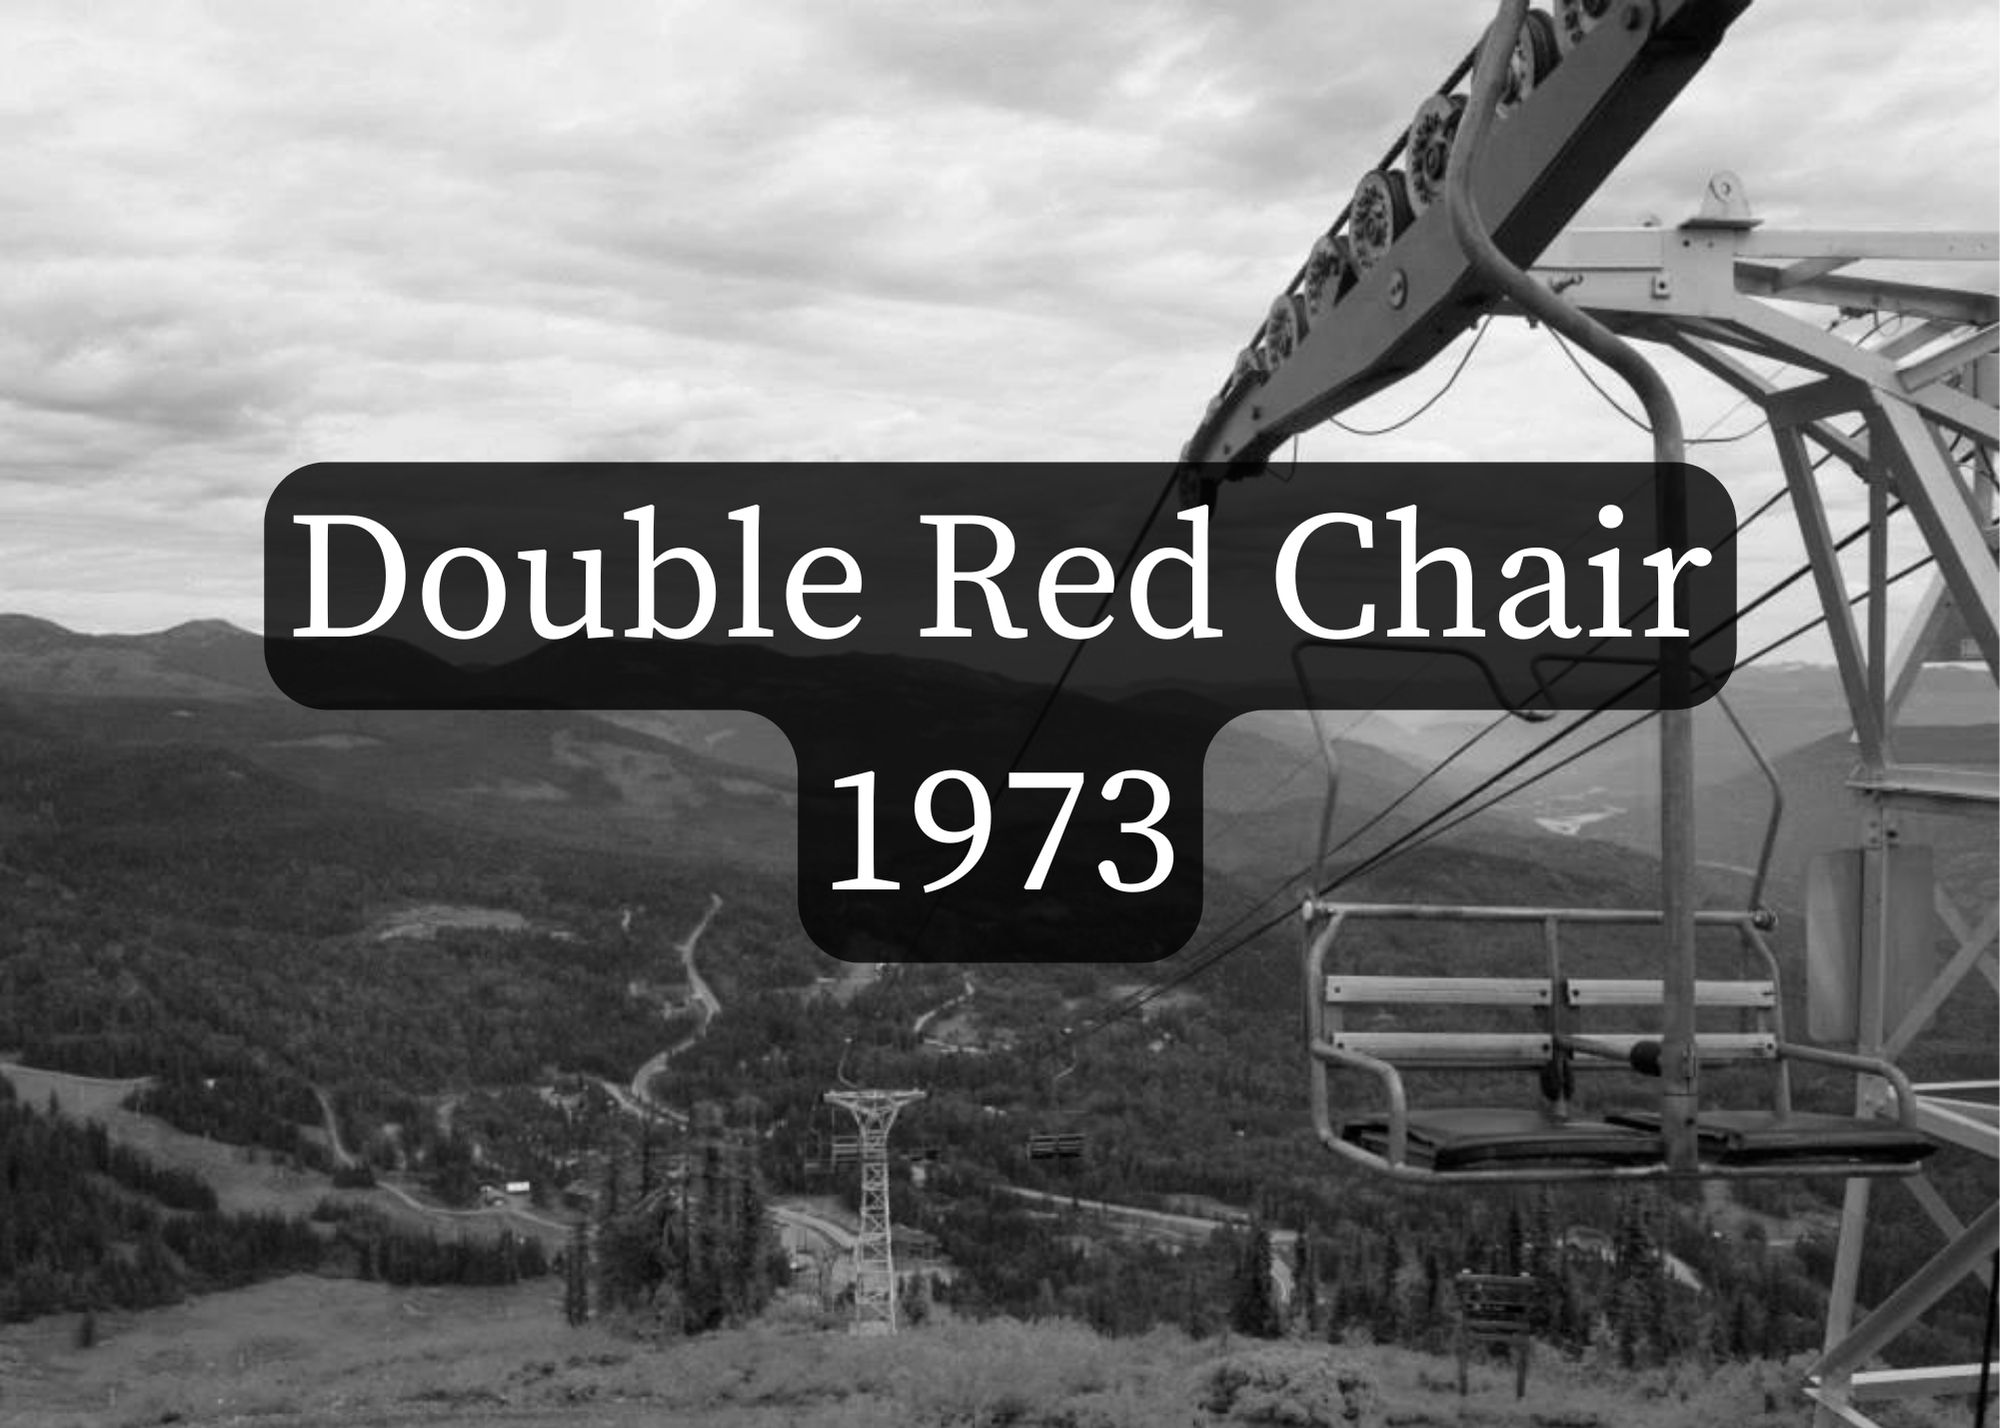 Link to Double Red Chair 1973.